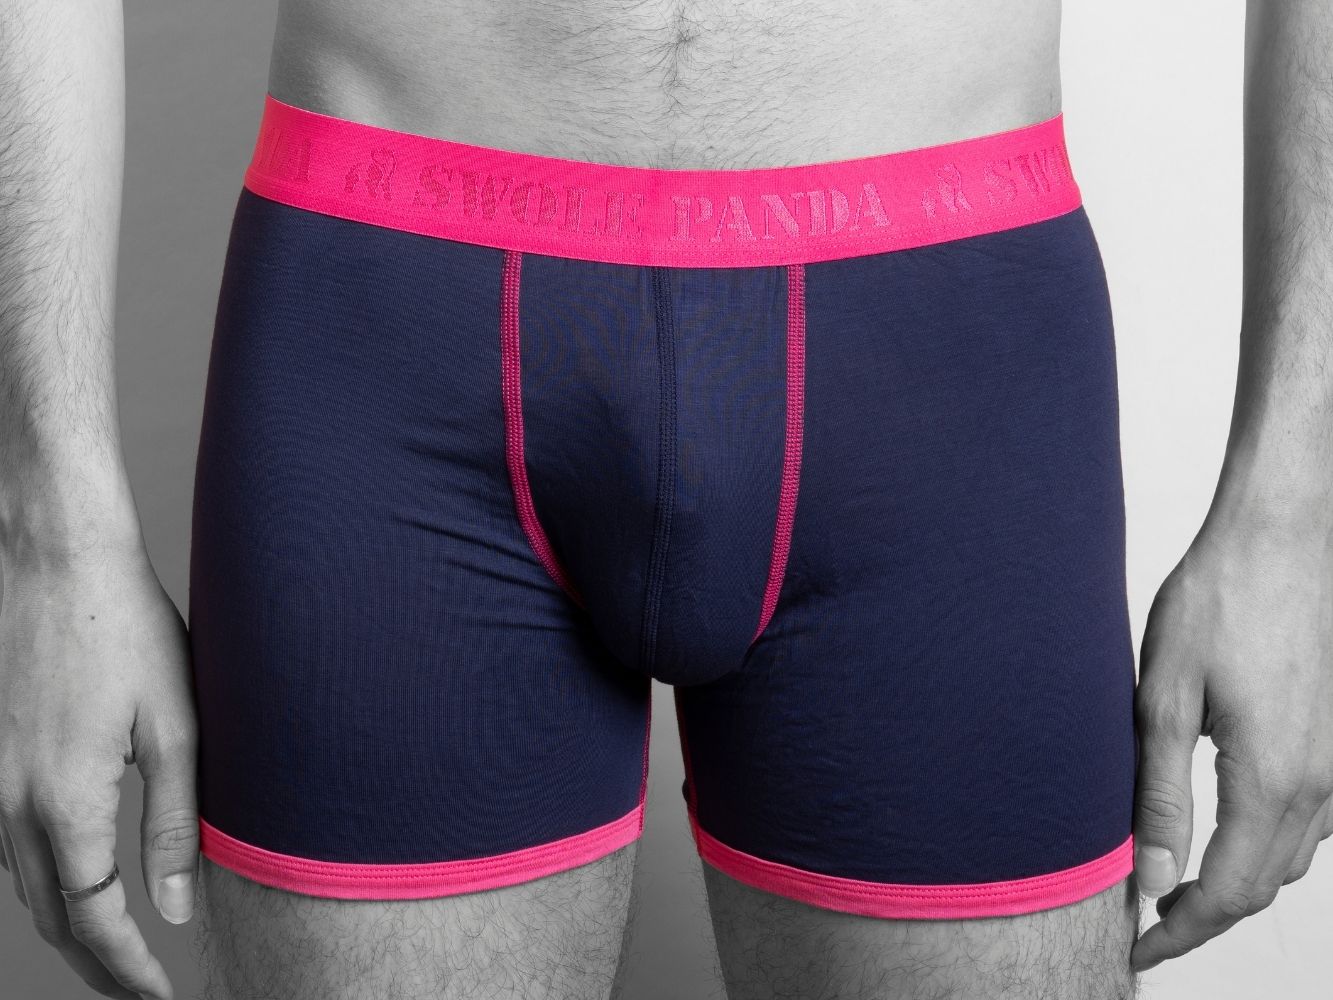 underwear-bamboo-boxers-navy-pink-band-1_f11f1cf0-3a51-4594-aa01-4cf3d38462a9.jpg